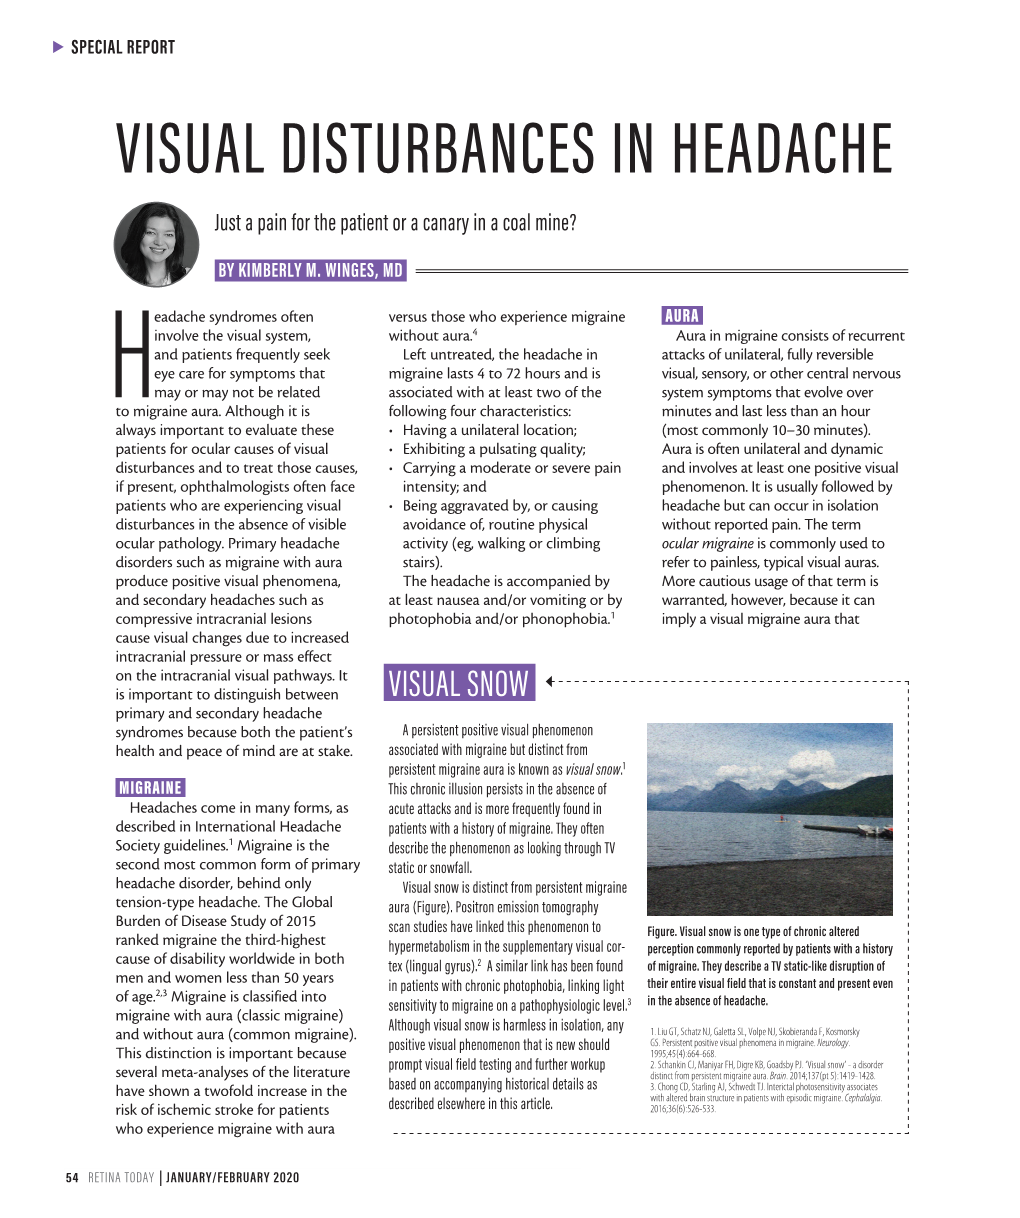 VISUAL DISTURBANCES in HEADACHE Just a Pain for the Patient Or a Canary in a Coal Mine?